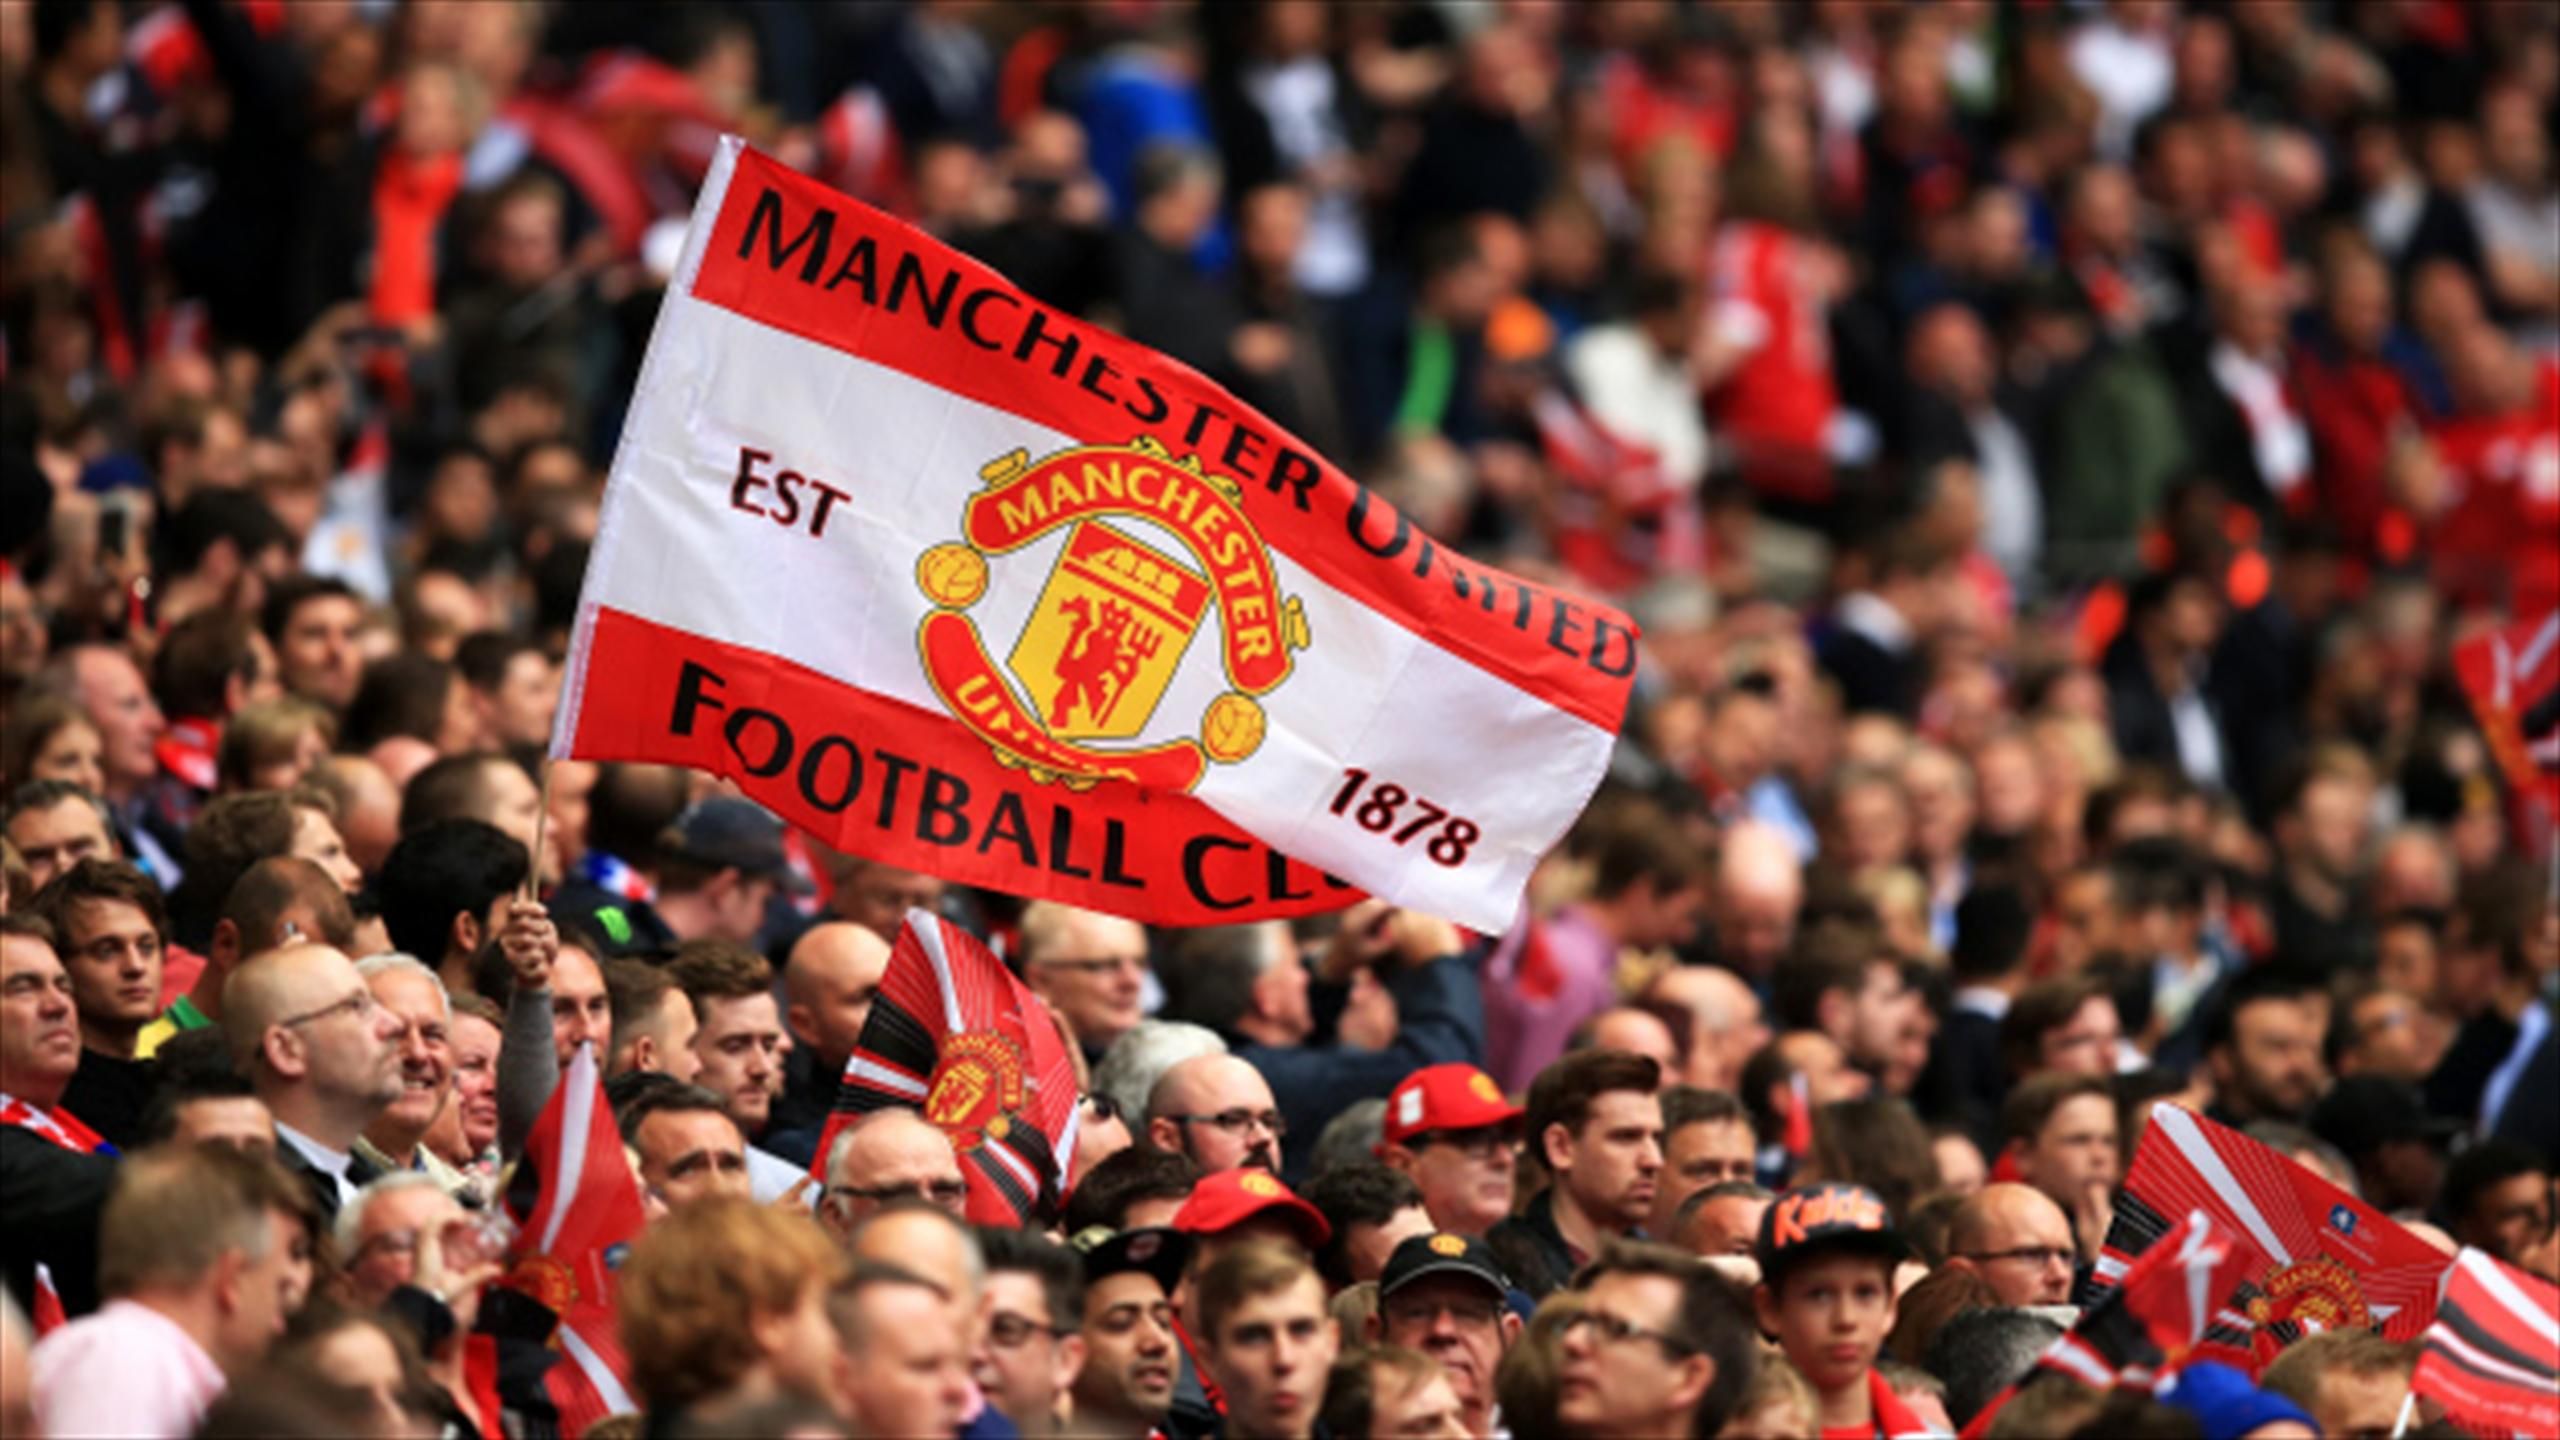 Sequel radium forarbejdning Manchester United fans advised not to wear club's colours while in Russia -  Eurosport